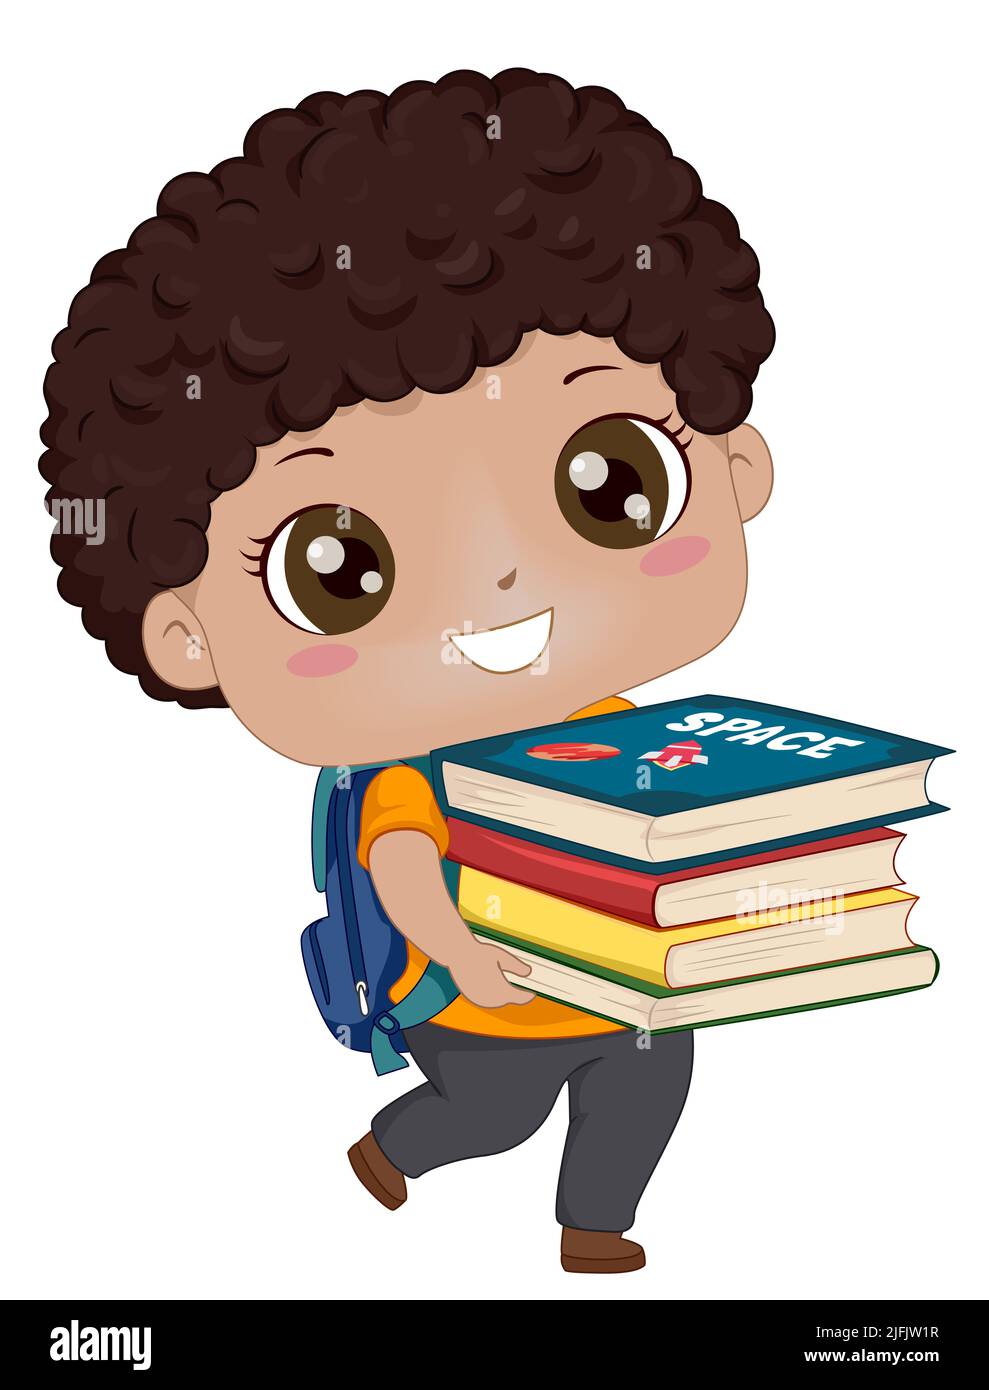 Illustration of African American Kid Boy Student with School Bag Carrying Educational Books Stock Photo